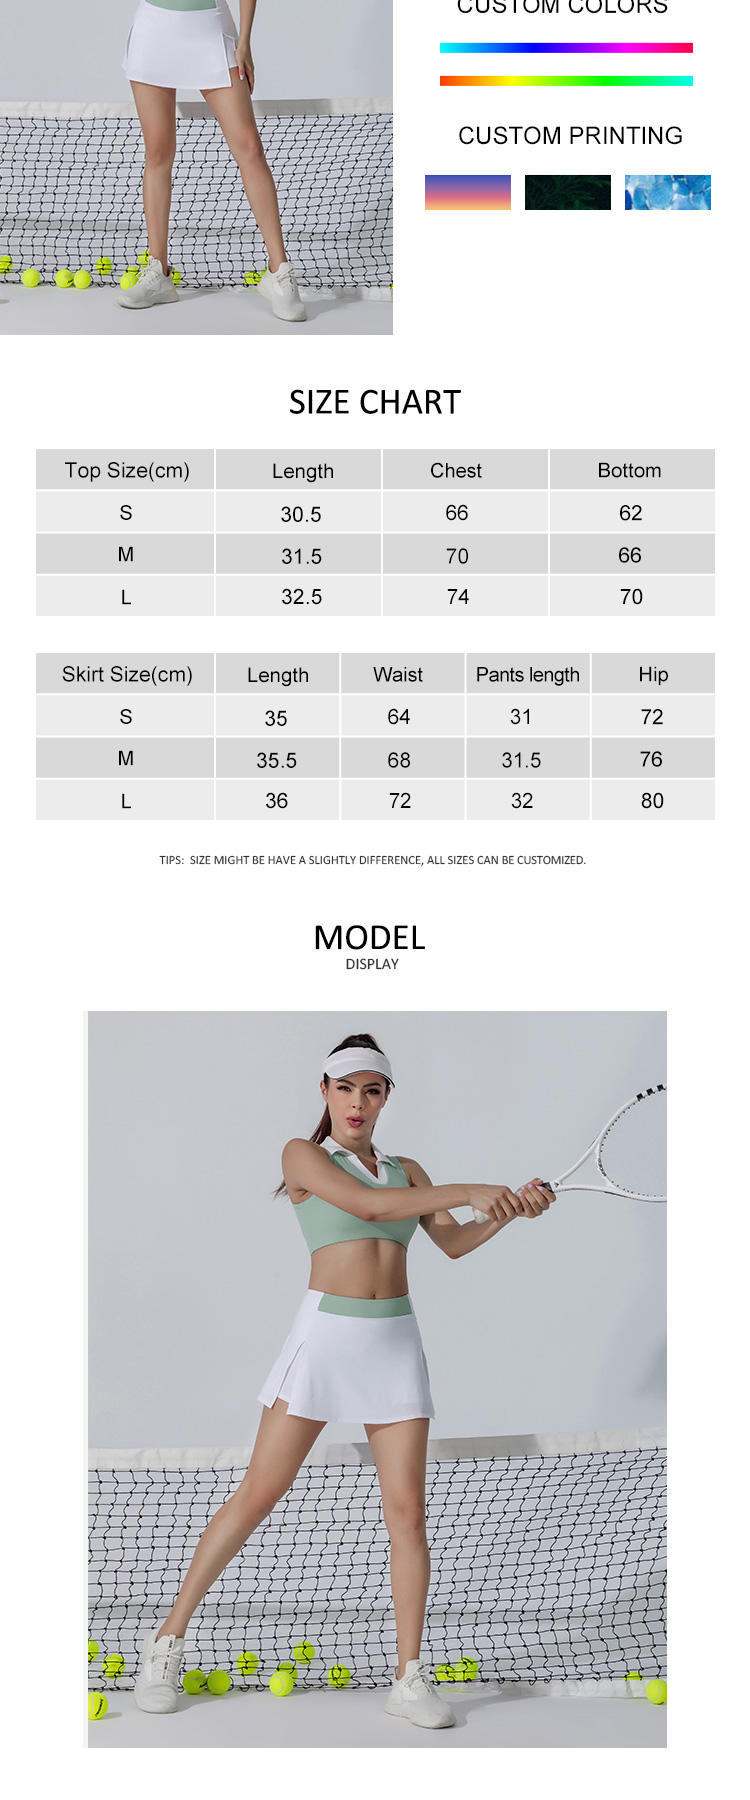 INGOR soft woman tennis clothes solutions for girls